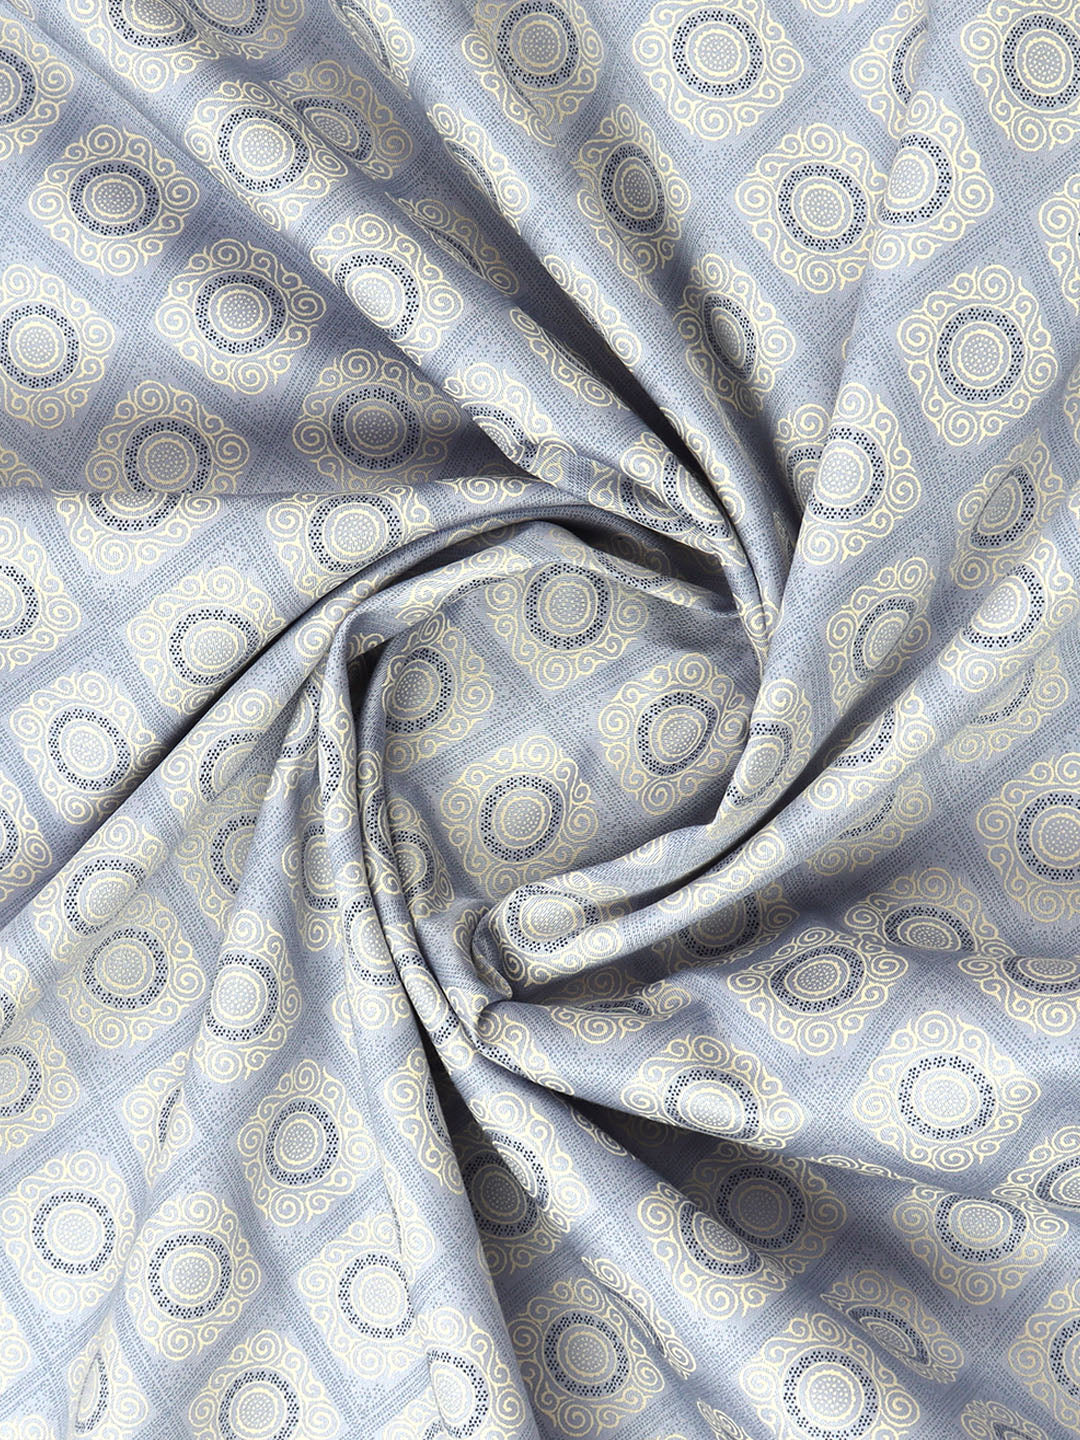 100% Cotton Light Blue With White Over All Printed Shirt Fabric Alpha - Close view